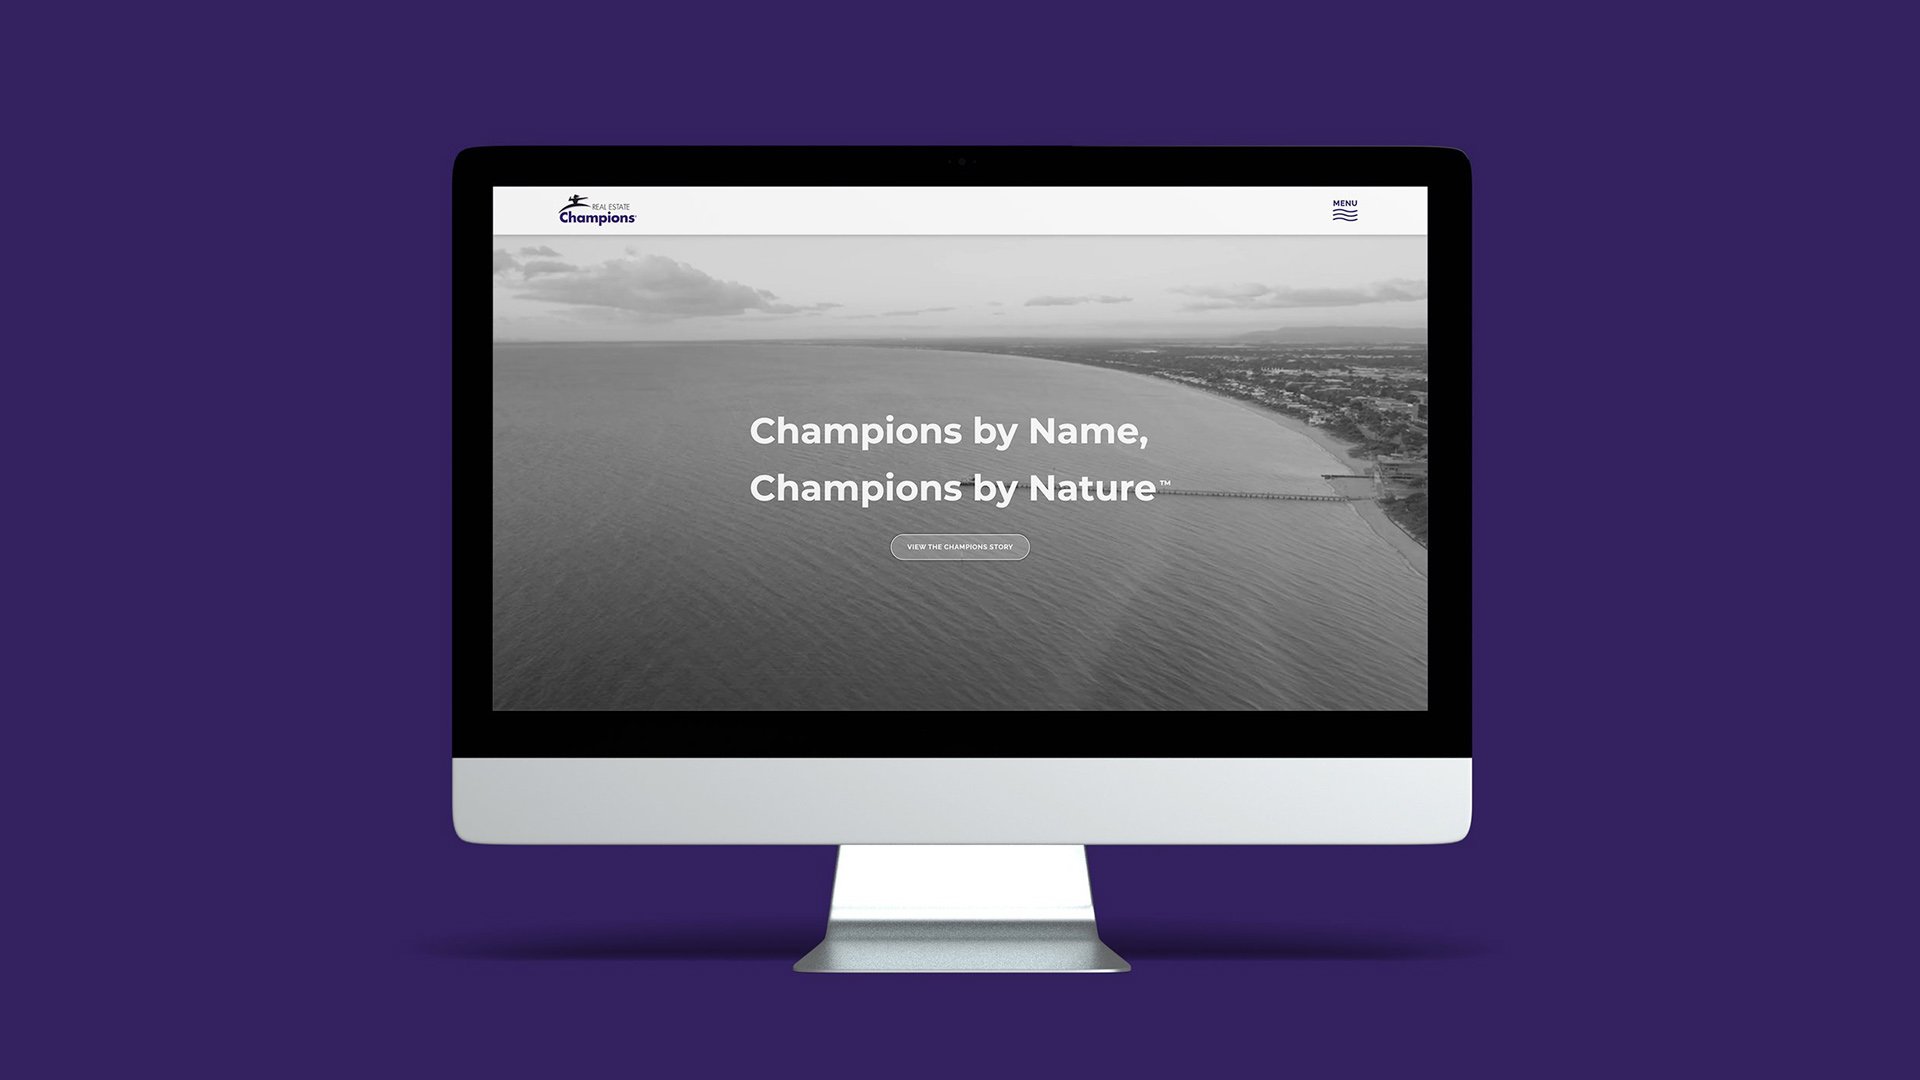 The homepage of Real Estate Champions' website on an iMac 